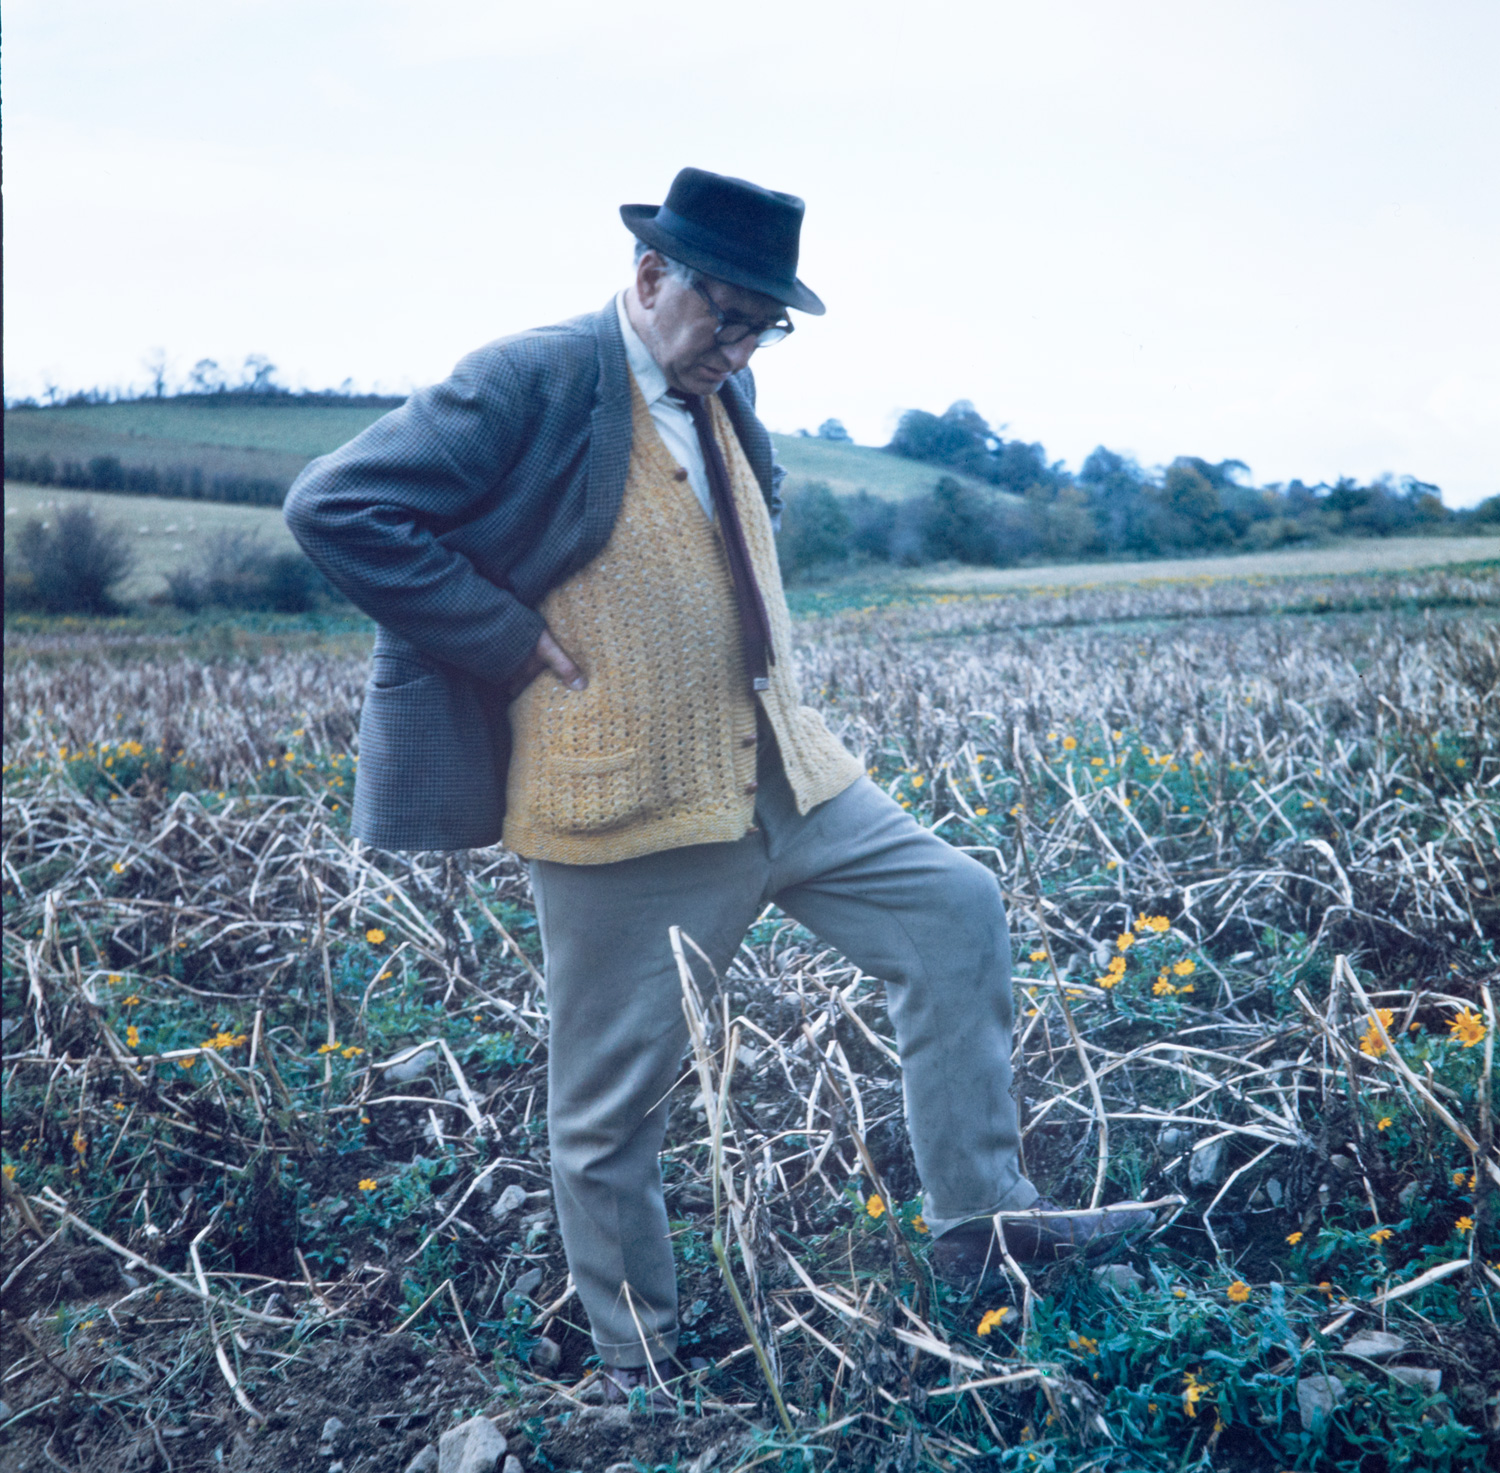 Ireland 1960s , Poet Patrick Kavanagh… … pondering the Stony Grey Soil of Monaghan at his native Inniskeen. The Dictionary of Irish Biography entry for Patrick Kavanagh gives 21 or 23 October 1904 as his birth date, but most other sources say that Patrick Kavanagh was born on 21 October, which is 109 years ago today. Photographer: Elinor Wiltshire Date: 1963